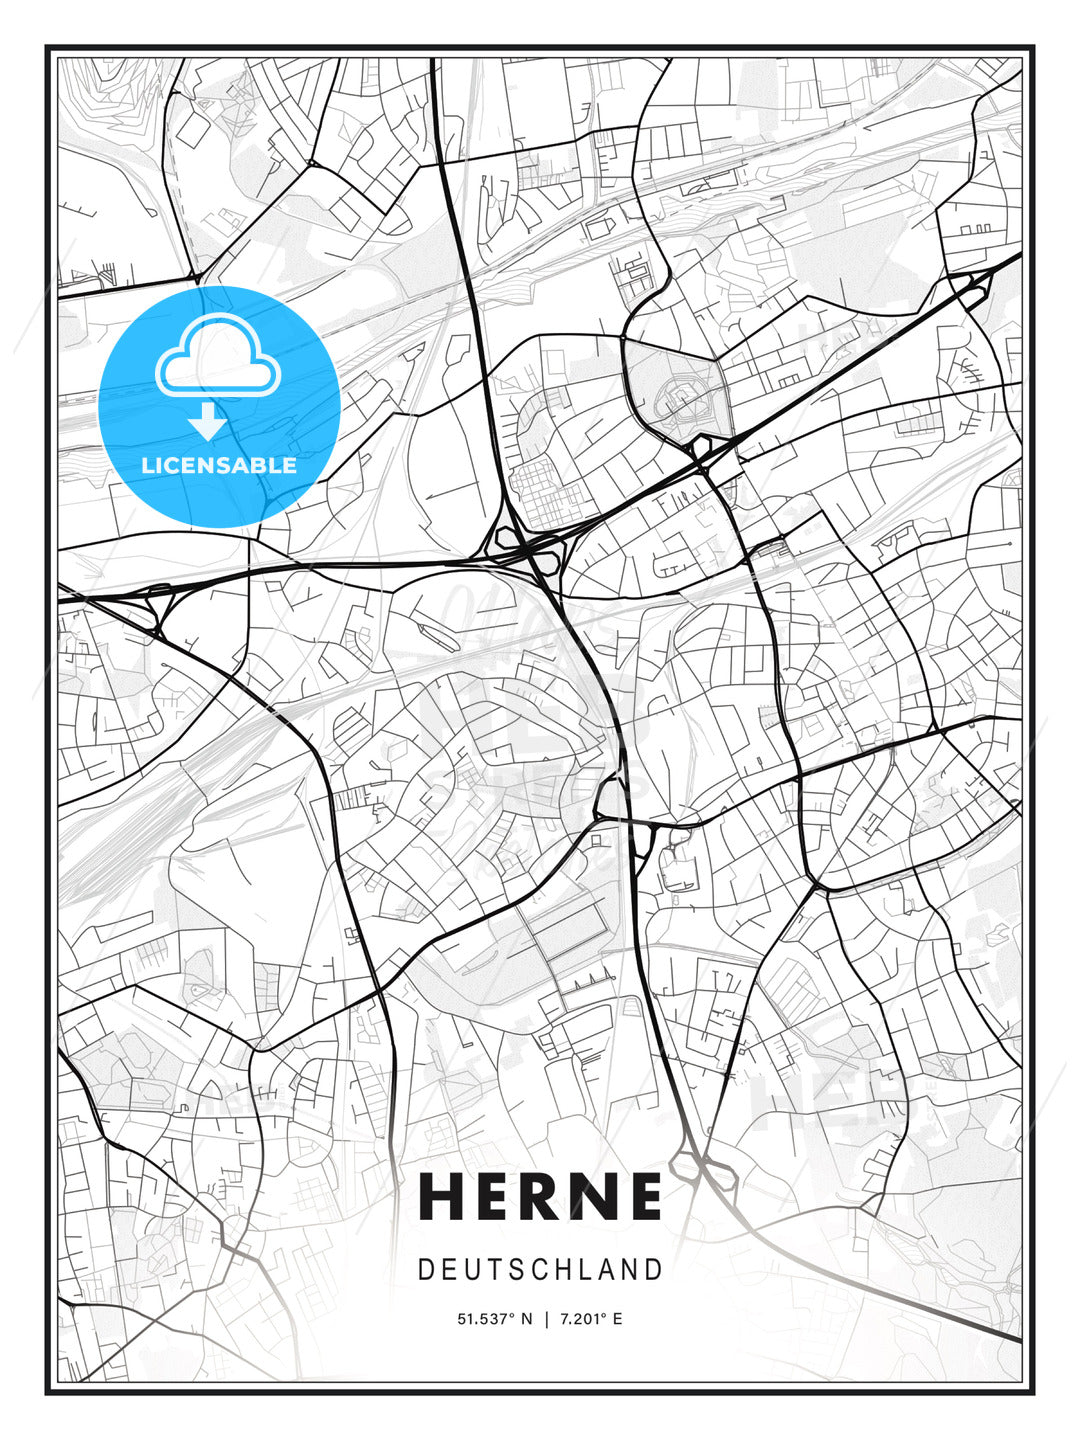 Herne, Germany, Modern Print Template in Various Formats - HEBSTREITS Sketches